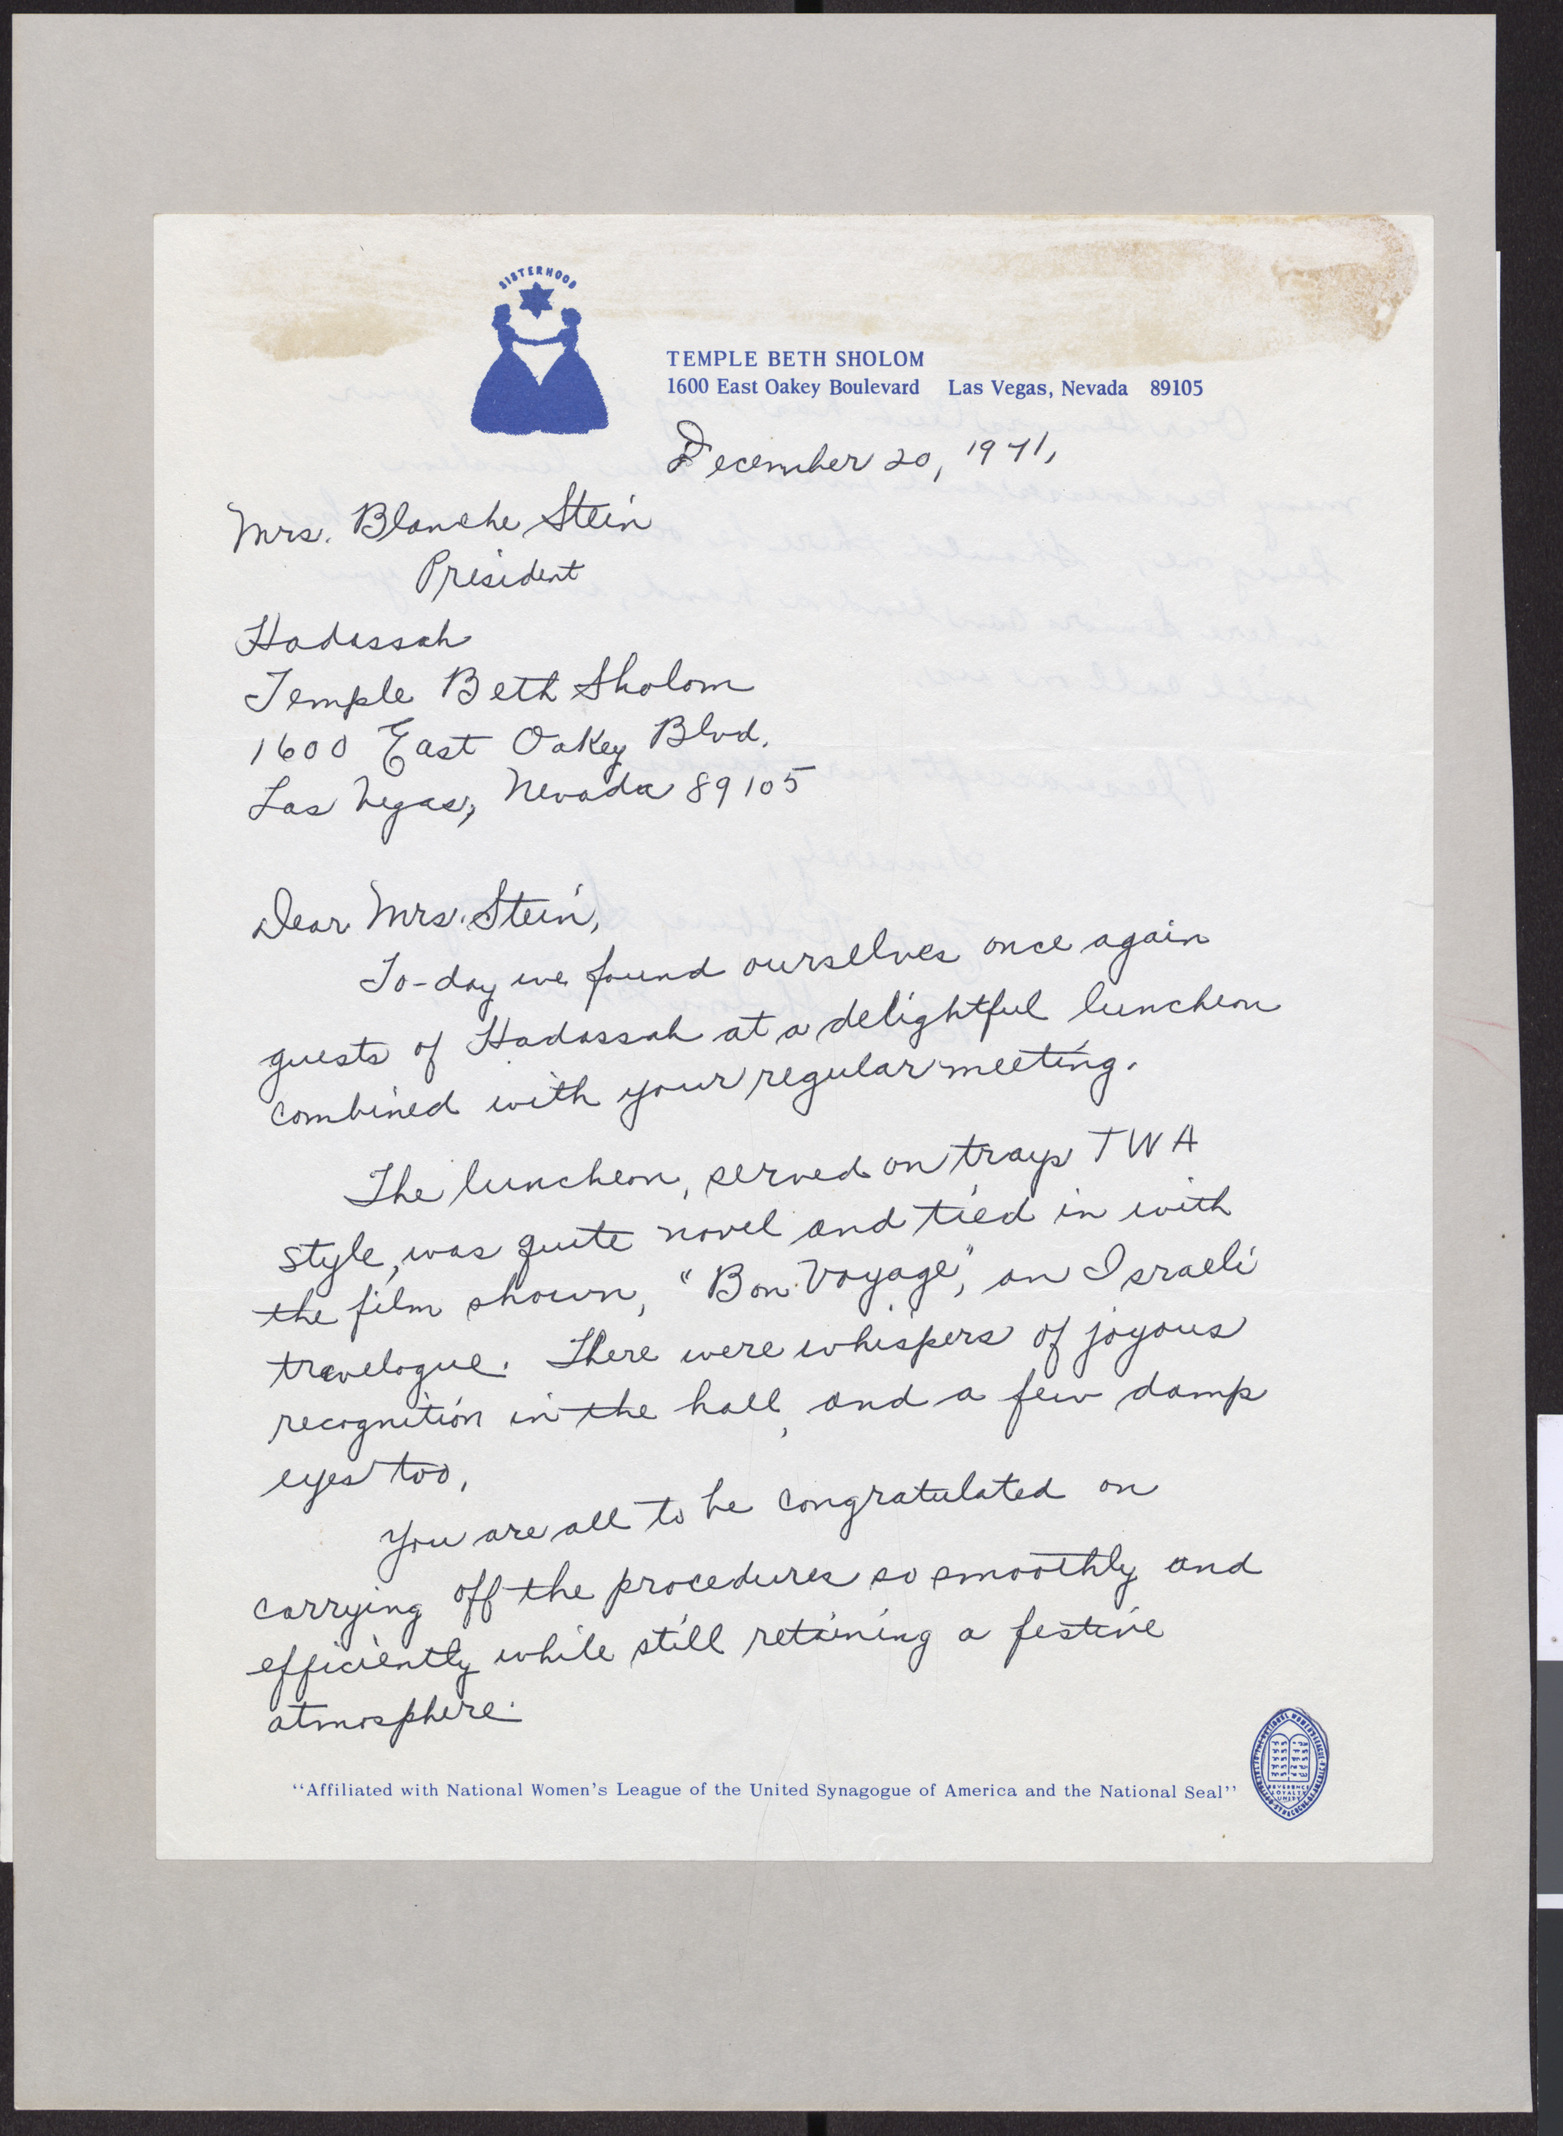 Letter to Blanche Stein, December 20, 1971, and inscription, "Magic Carpet Trip Flight Luncheon," and photographs of Hadassah event